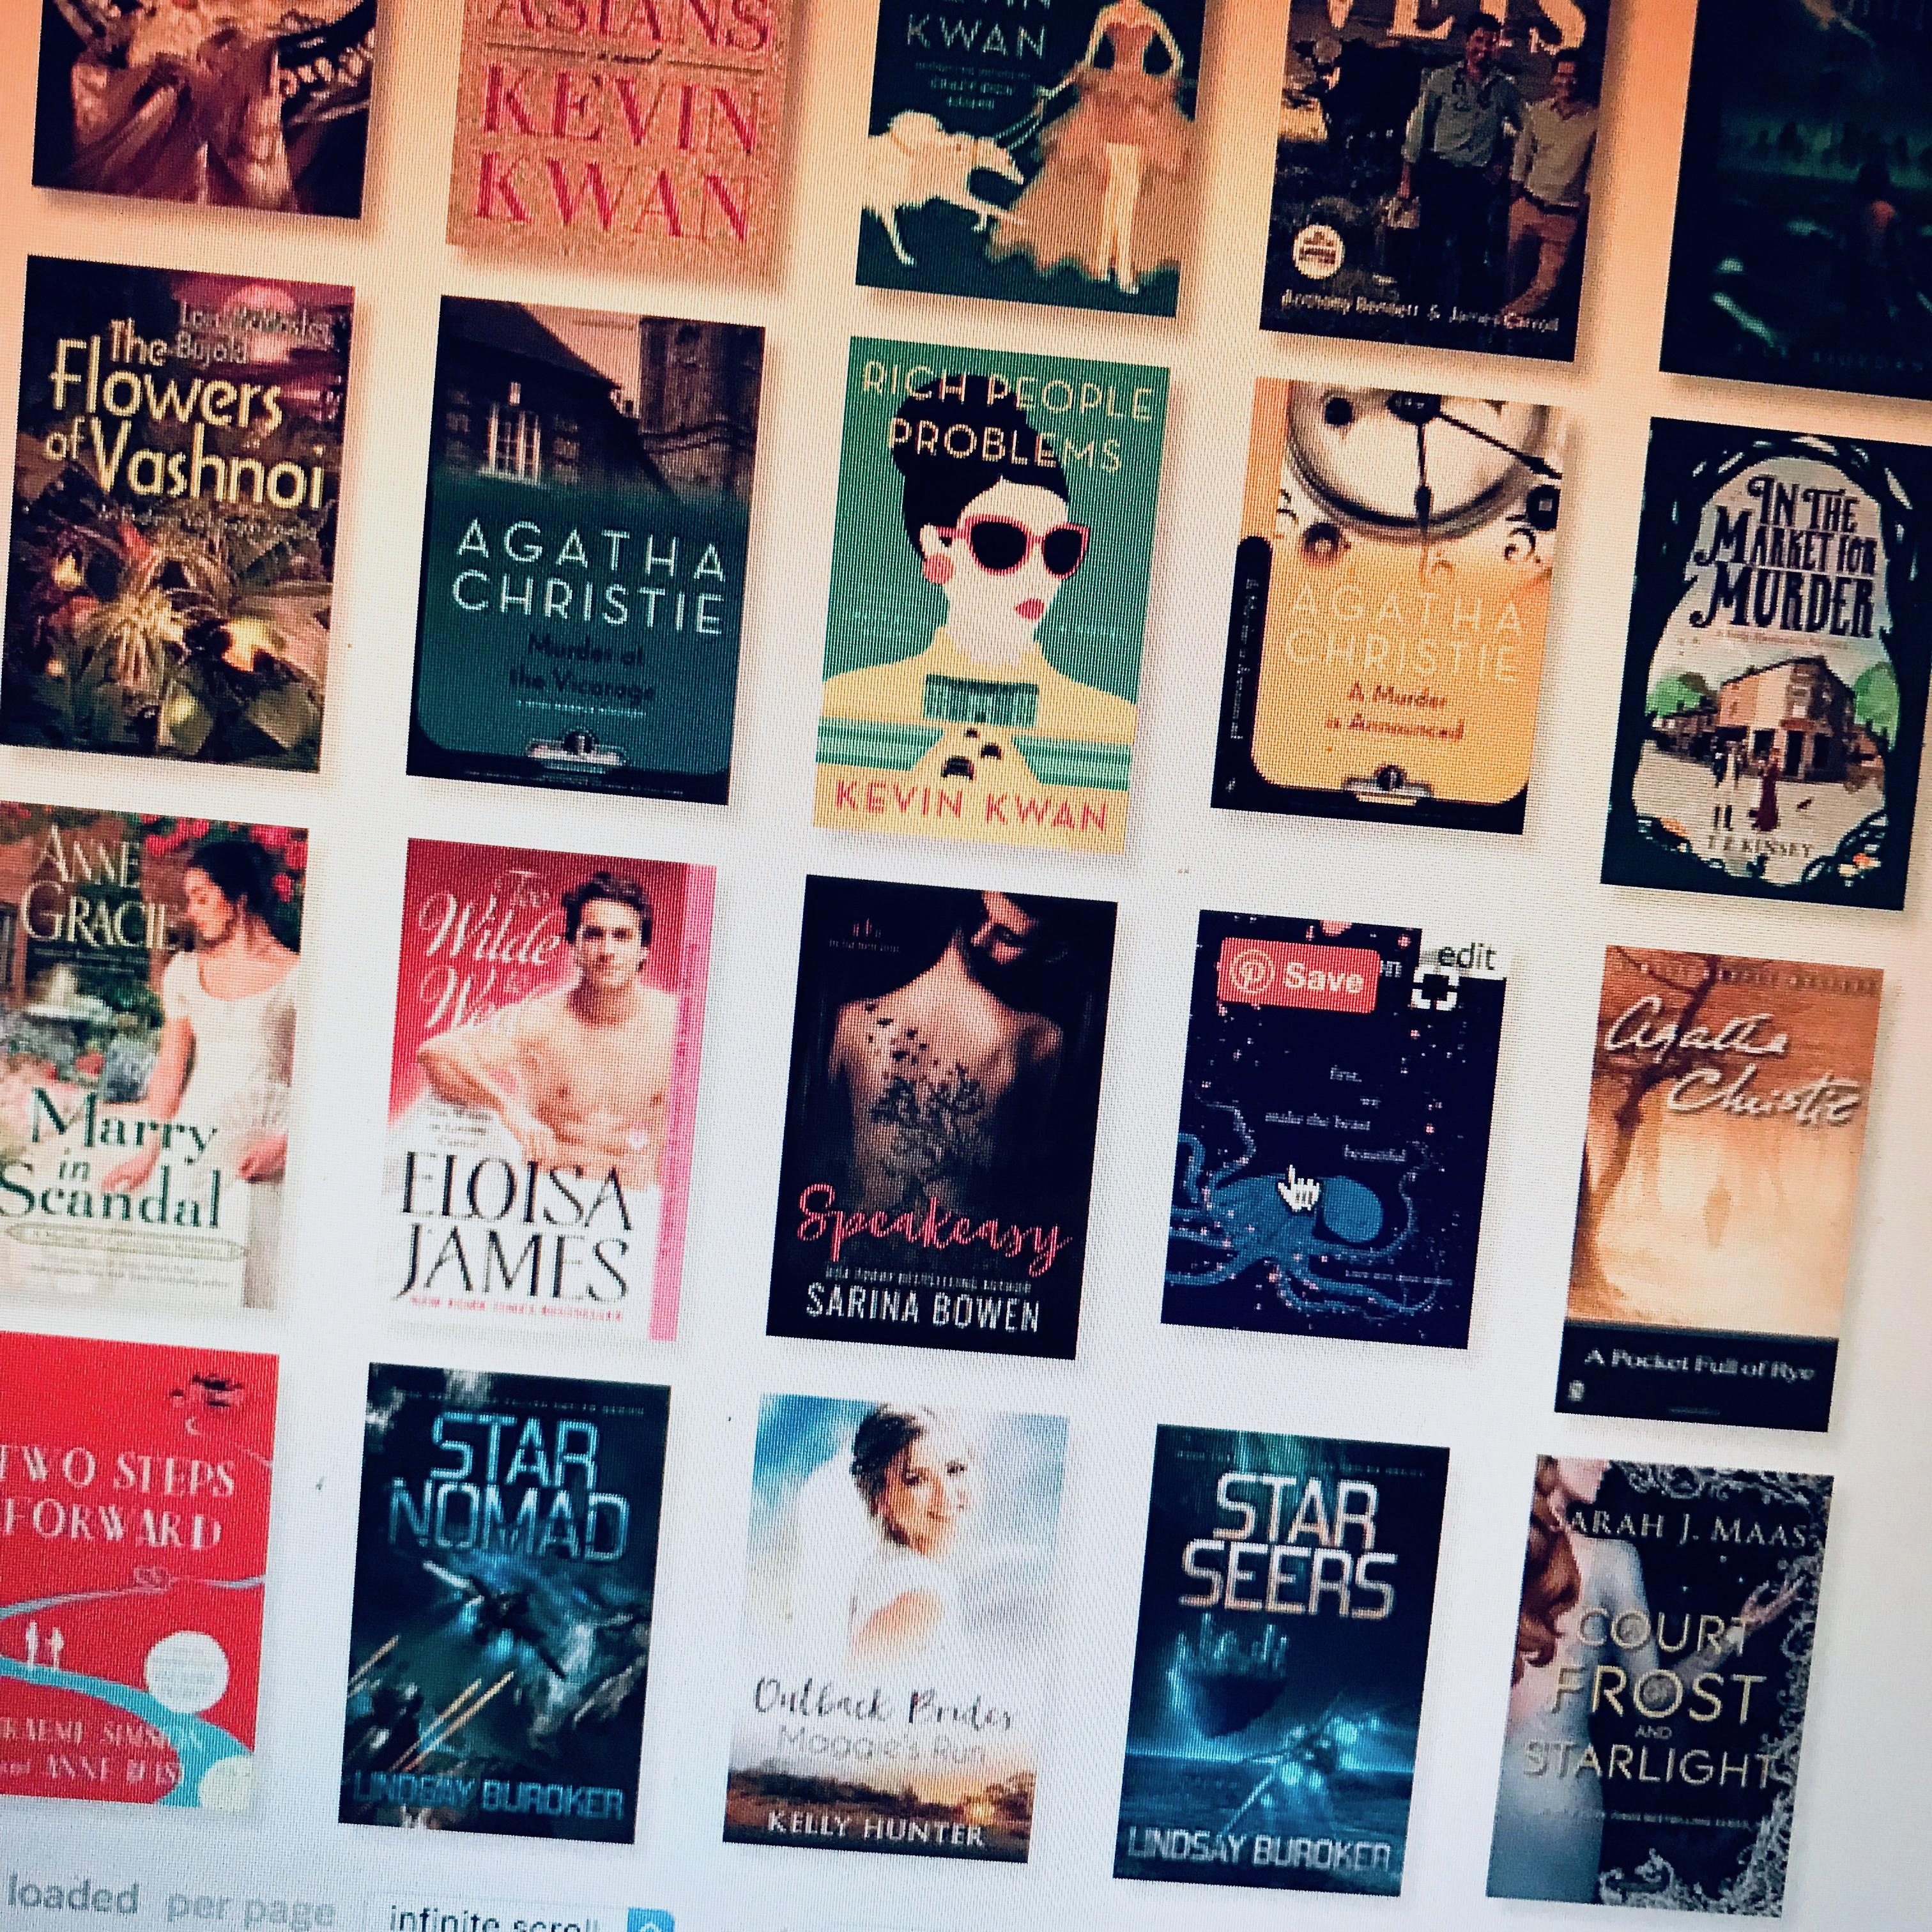 Image of grid of book covers from Goodreads read-2018 list